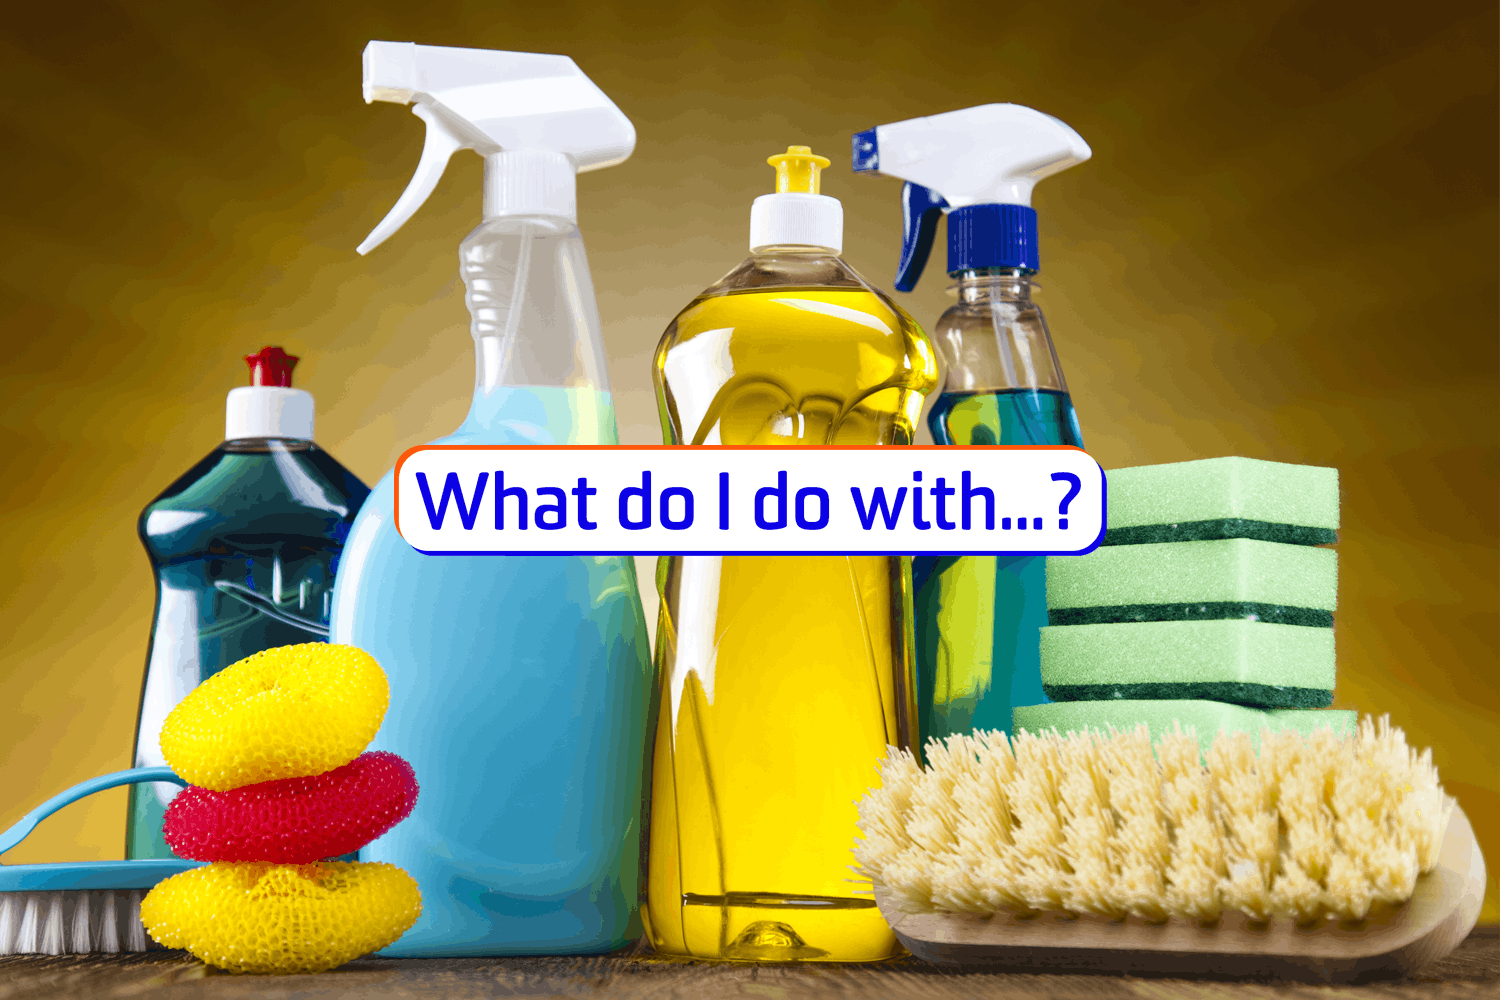 How to dispose of cleaning products